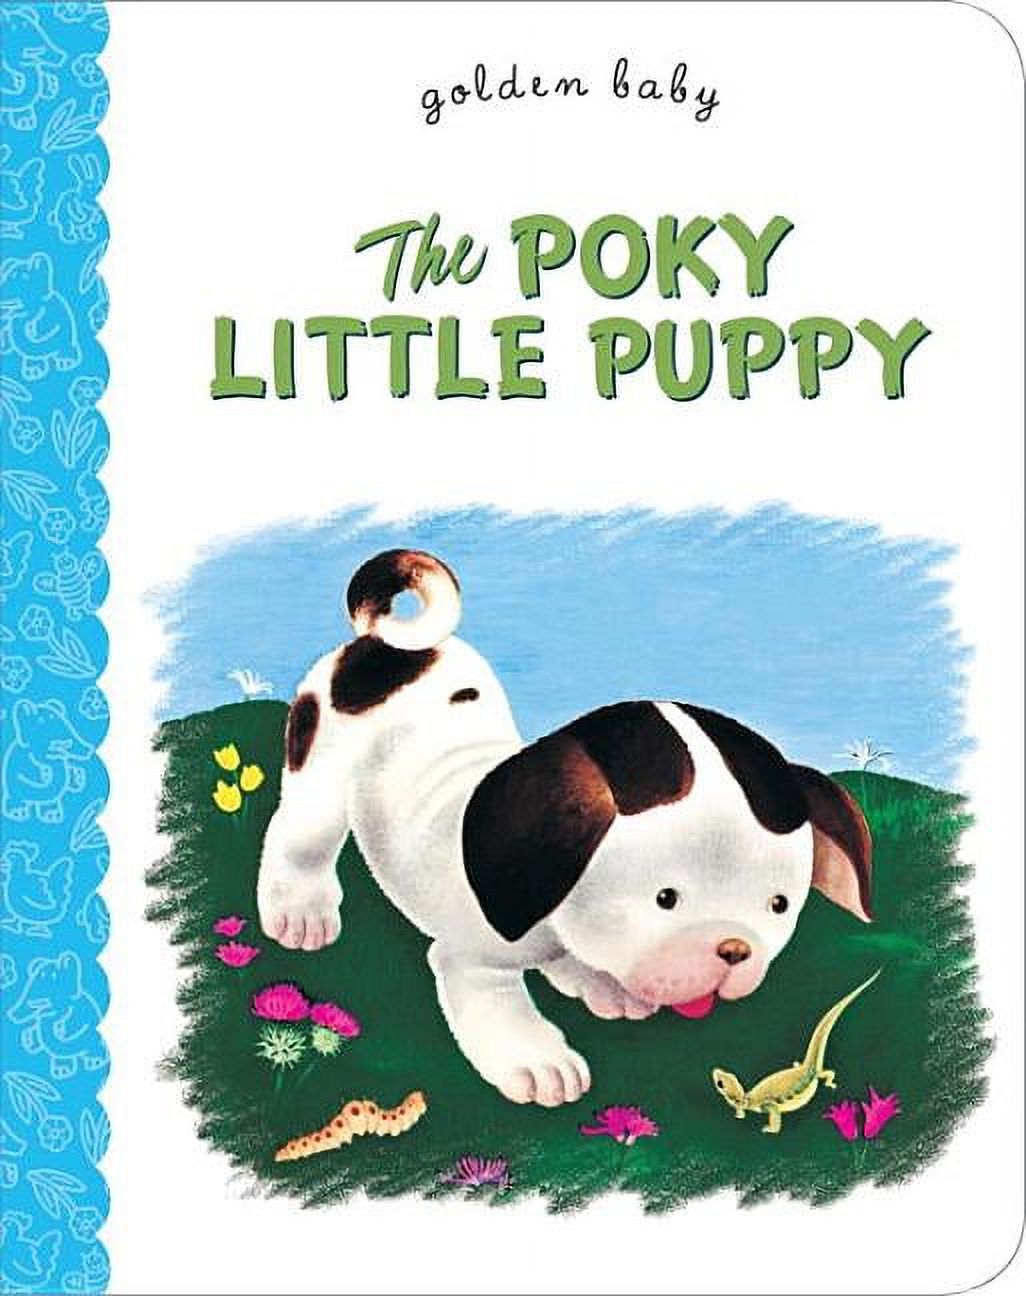 The Poky Little Puppy - image 1 of 2